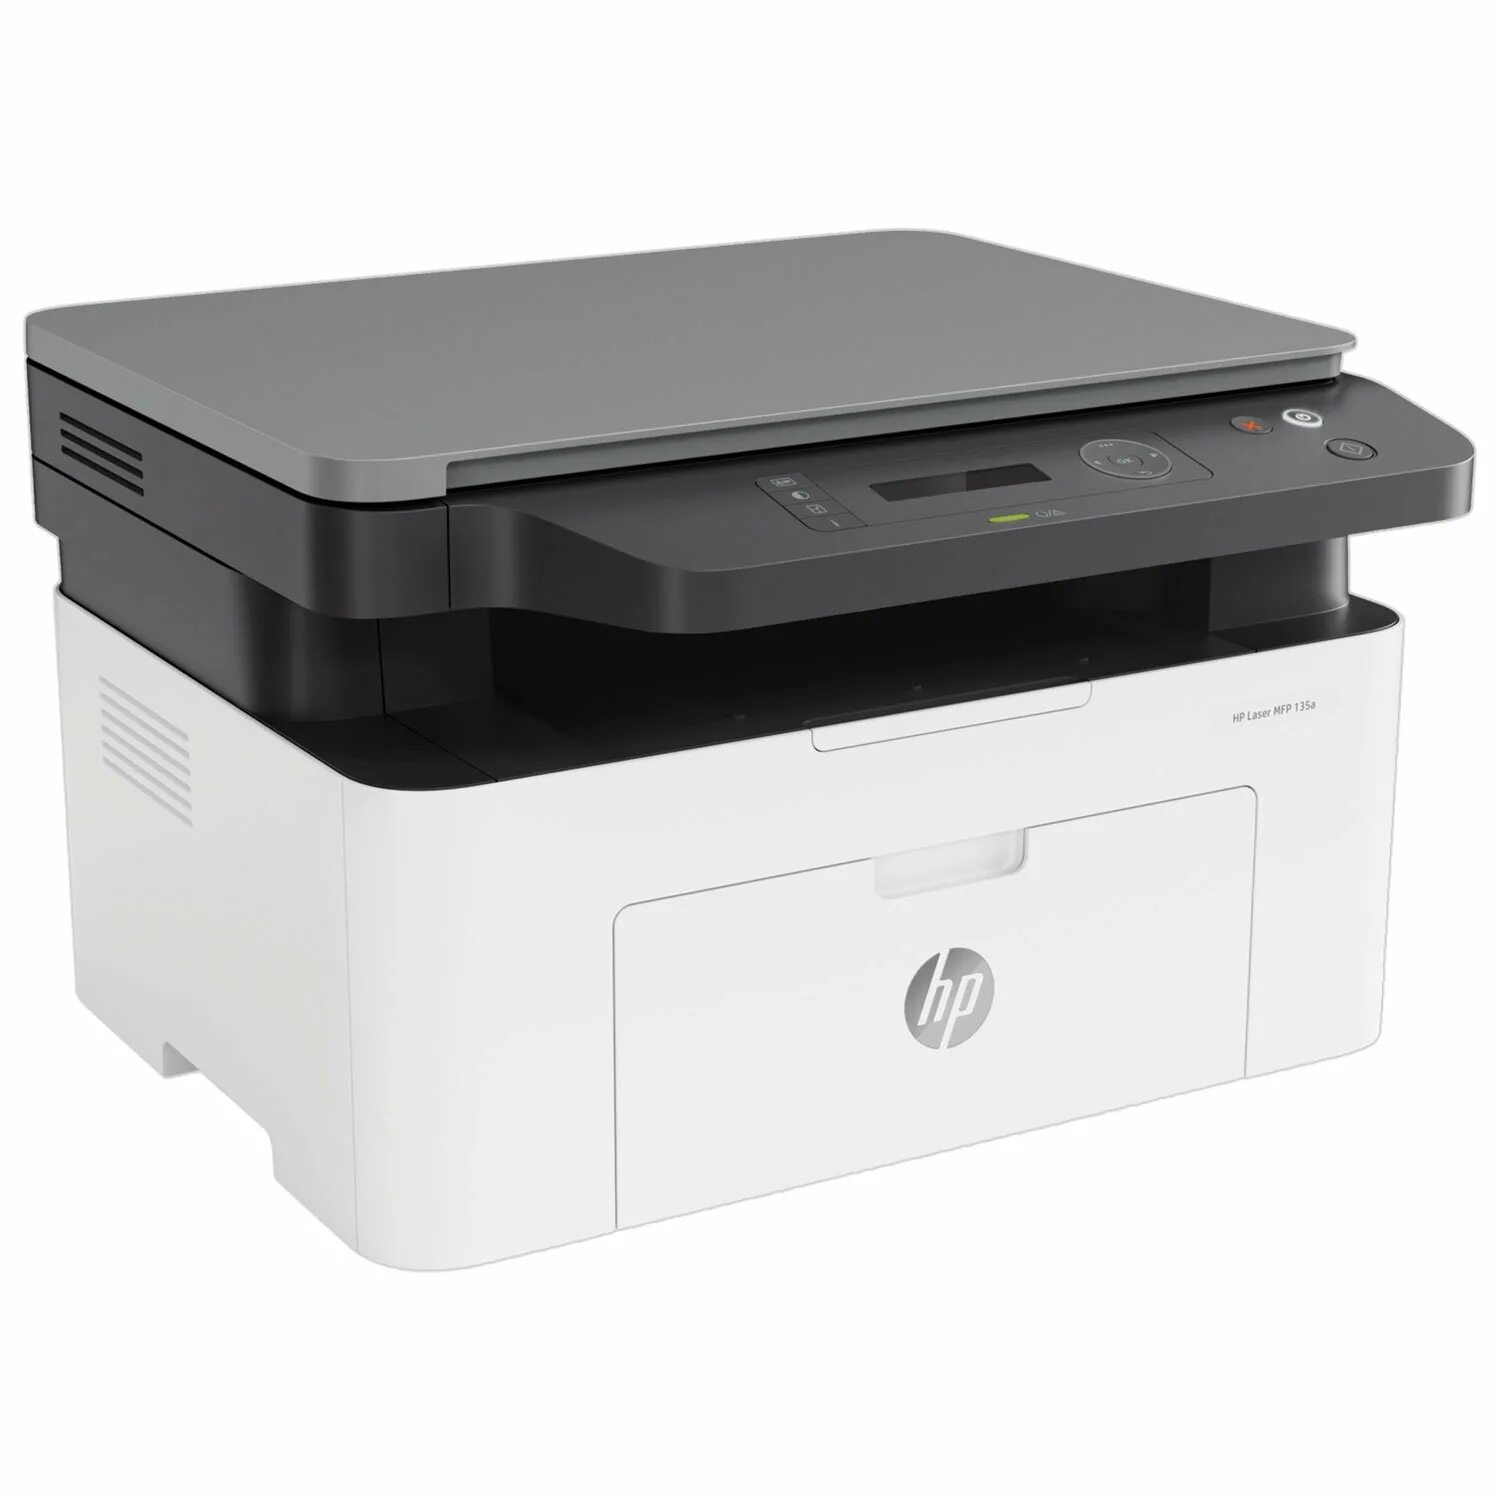 Лазерный мфу для дома. HP Color Laser MFP 179fnw 4zb97a. HP Color Laser MFP 178nw. МФУ лазерное HP Laser 135a. МФУ HP Laser MFP 137fnw 4zb84a.